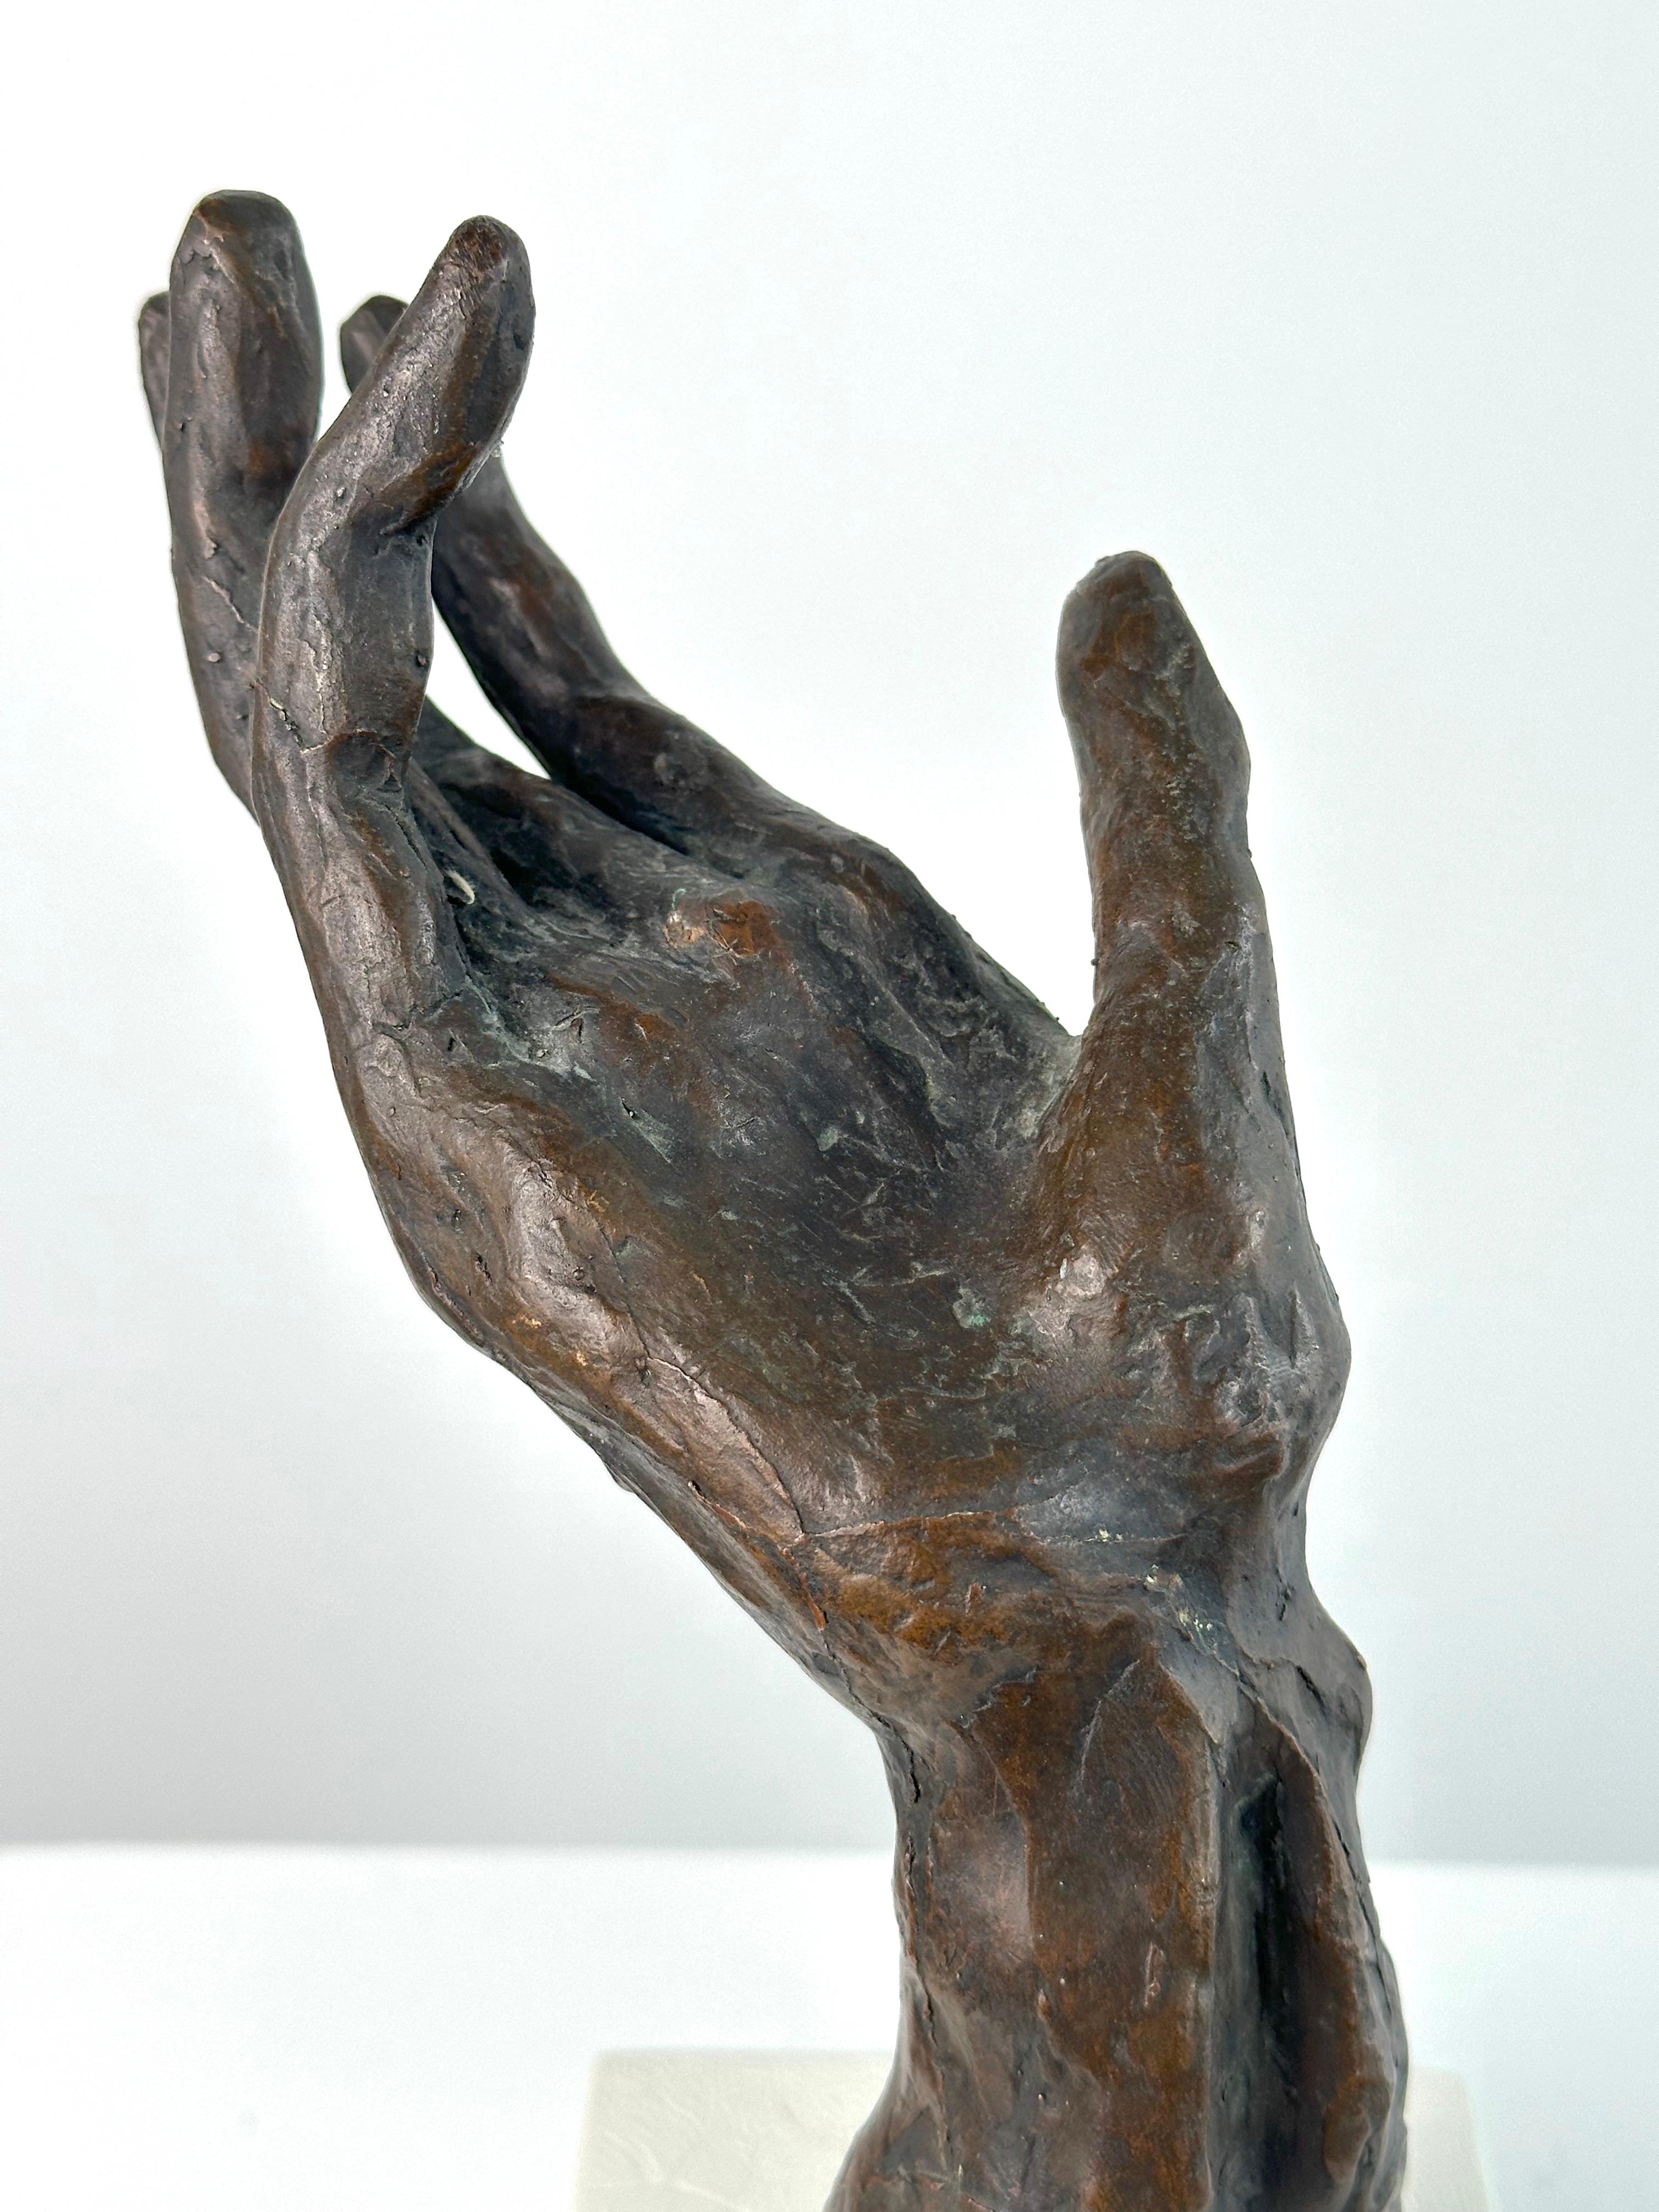 Reaching, ca. 1980. Cast bronze. Signed in lower region on wrist.

A rare example from the artist's later period influenced by figurative abstraction with expressionist tendencies.

James Edward Lewis (August 4, 1923 – August 9, 1997) was an